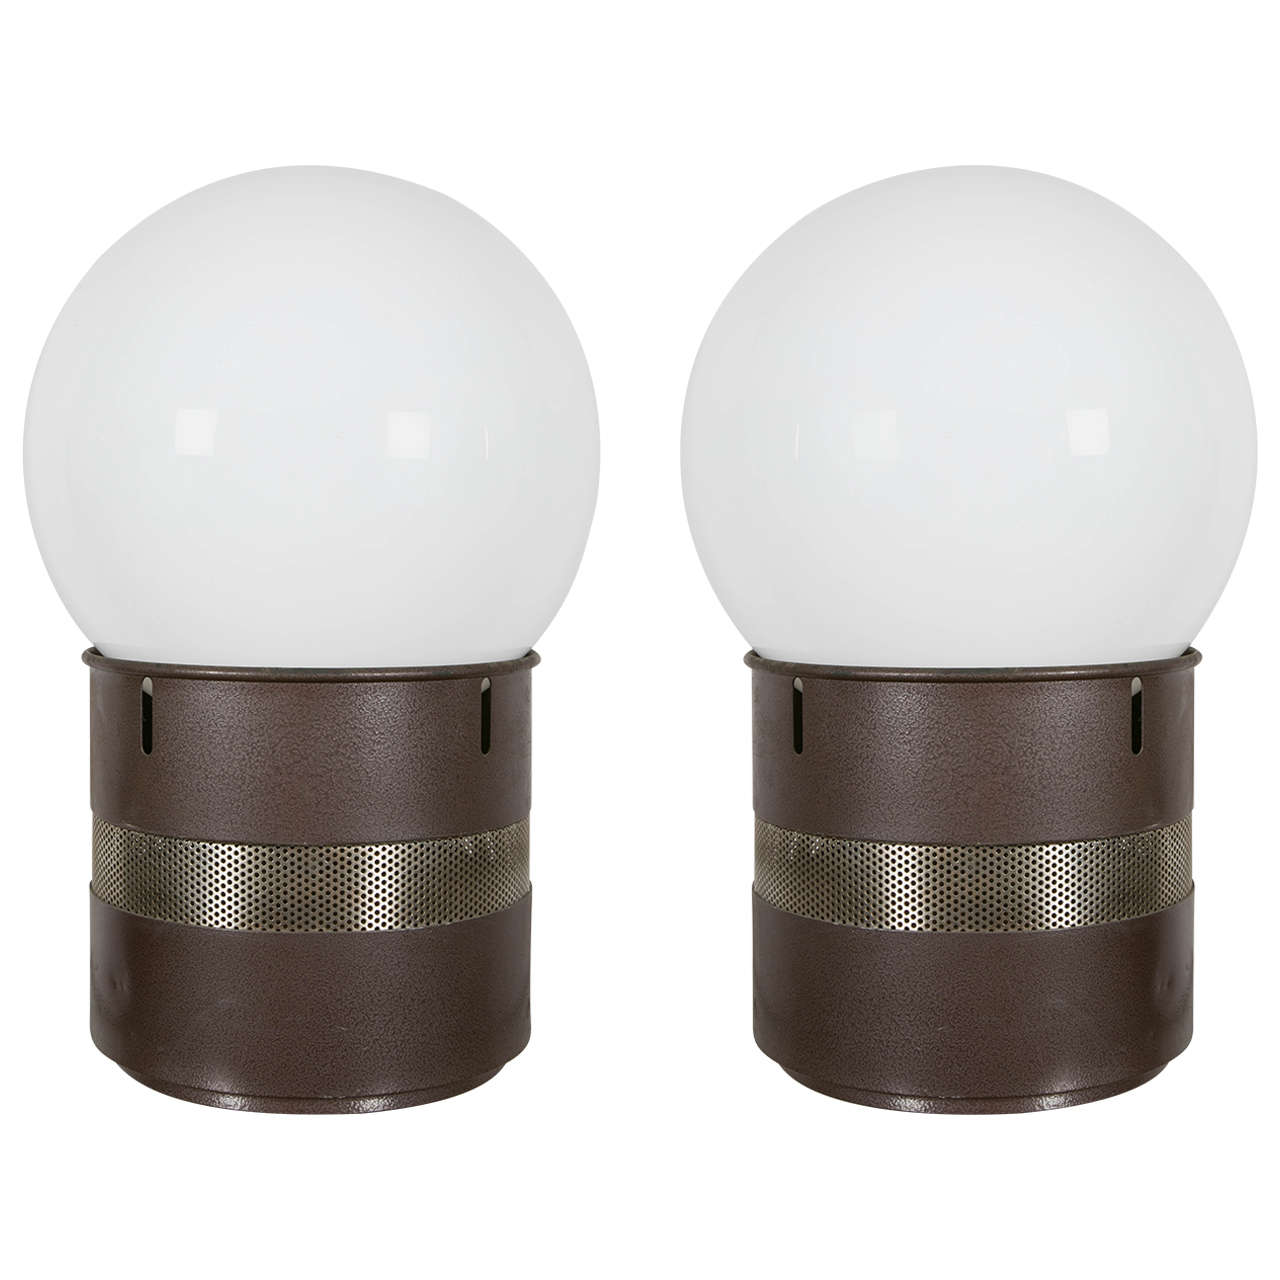 Pair of Mezza Oracolo Table Lamps by Gae Aulenti